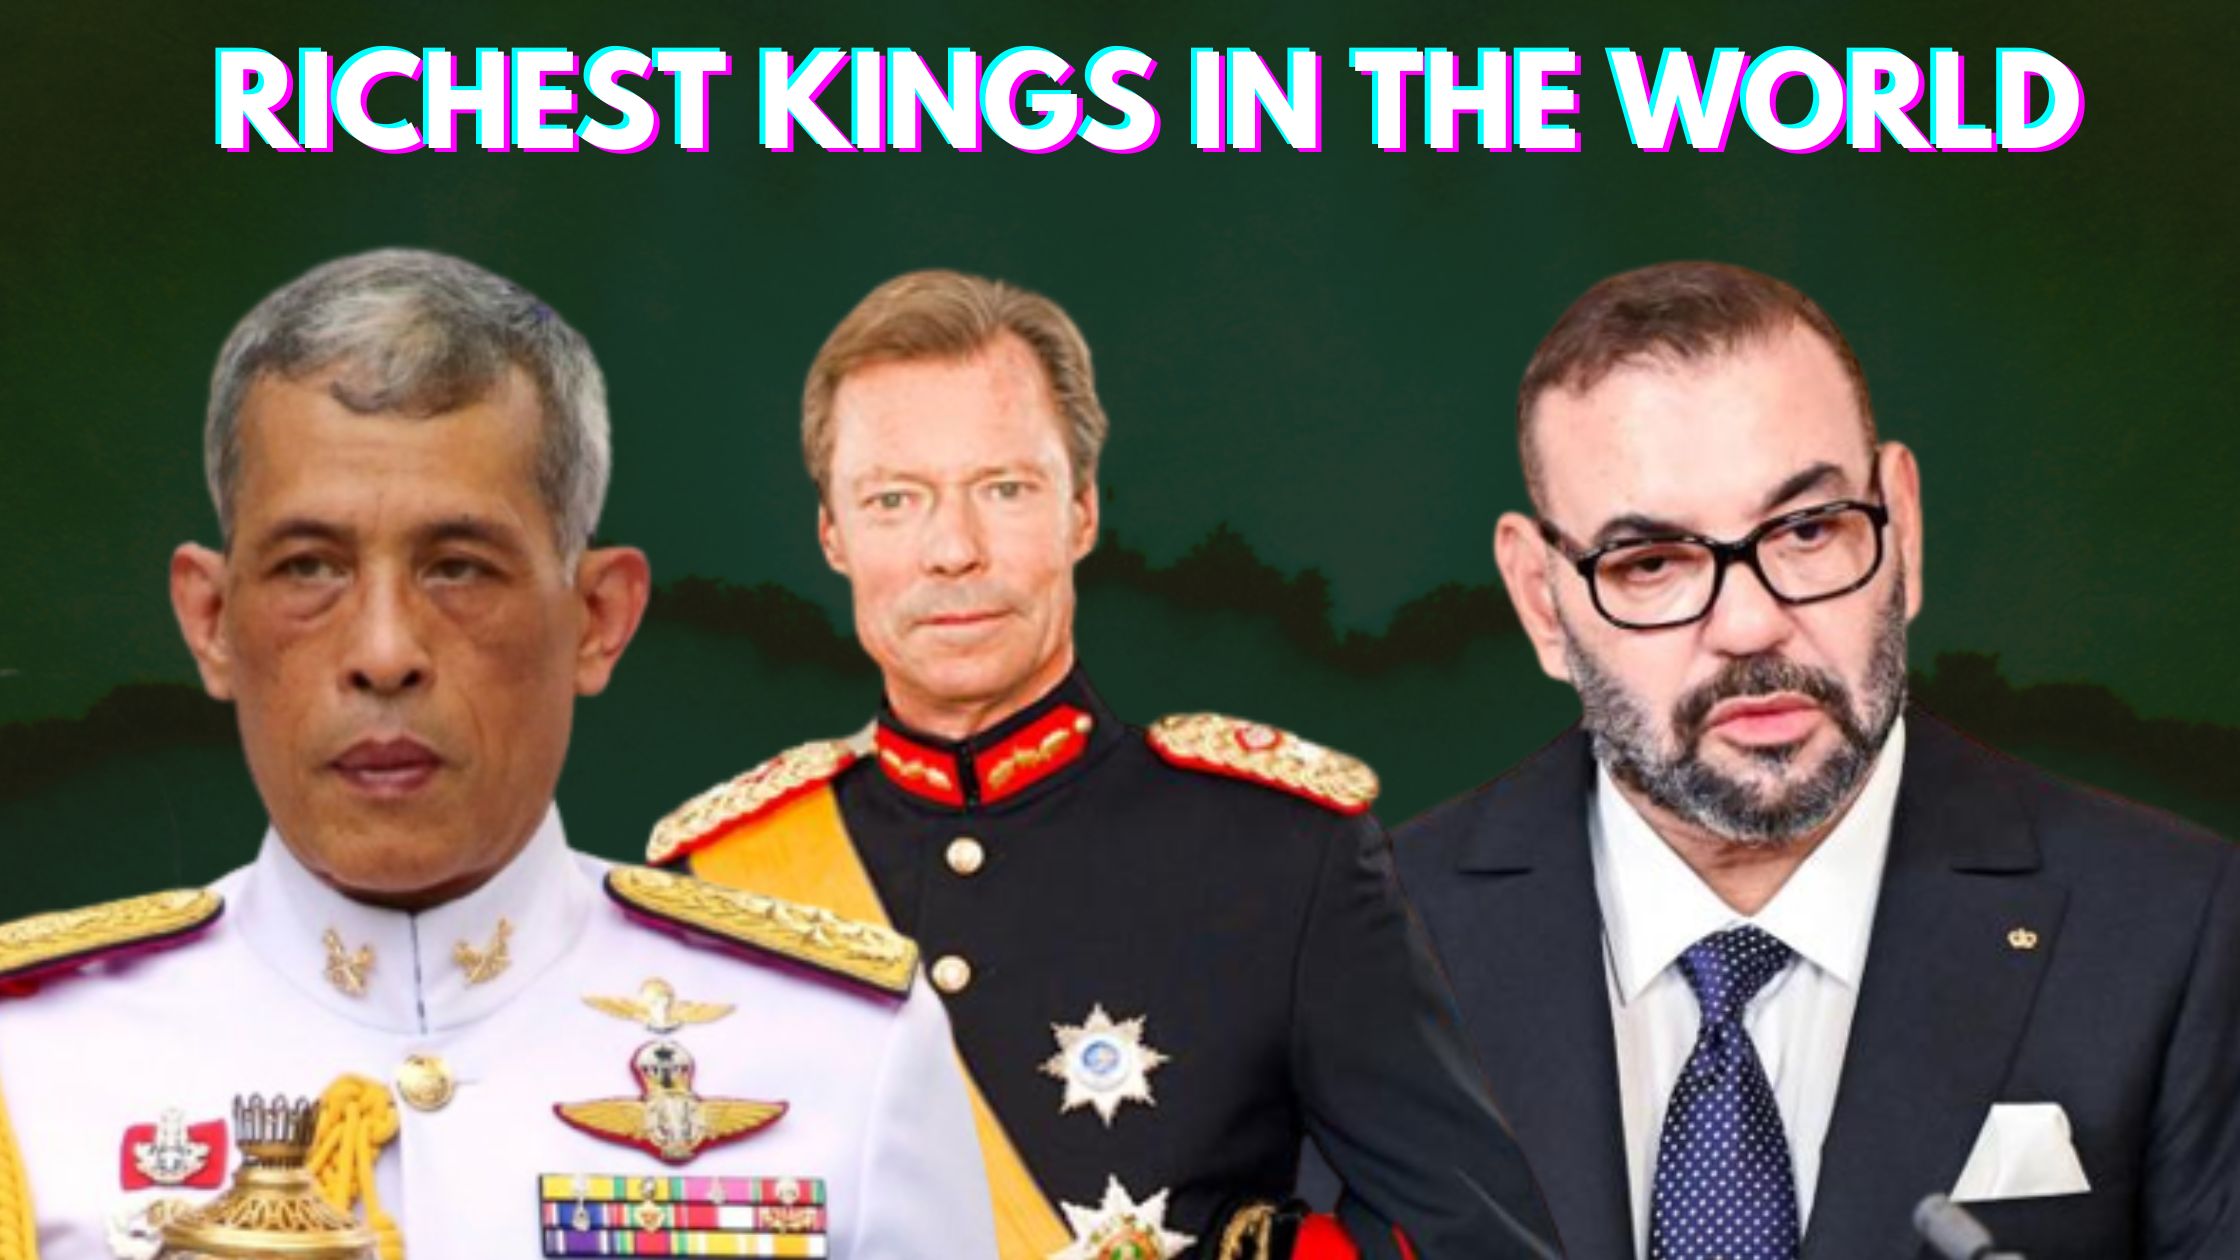 Top 10 Richest Kings in the World and Their Net Worth